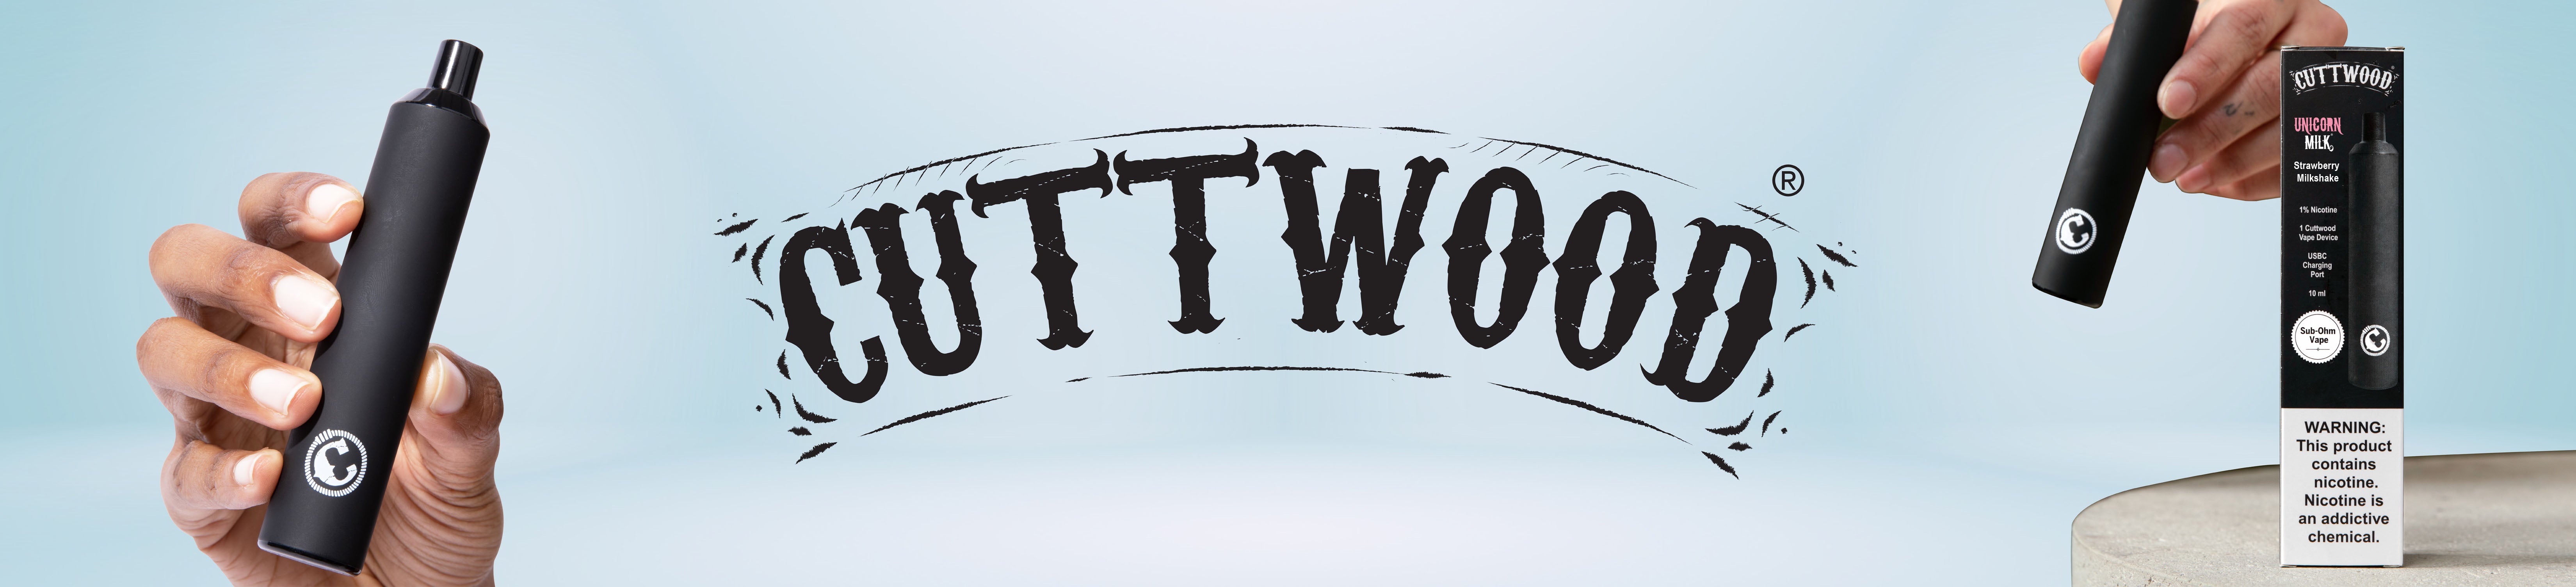 Cuttwood Disposable Vapes Collection Banner